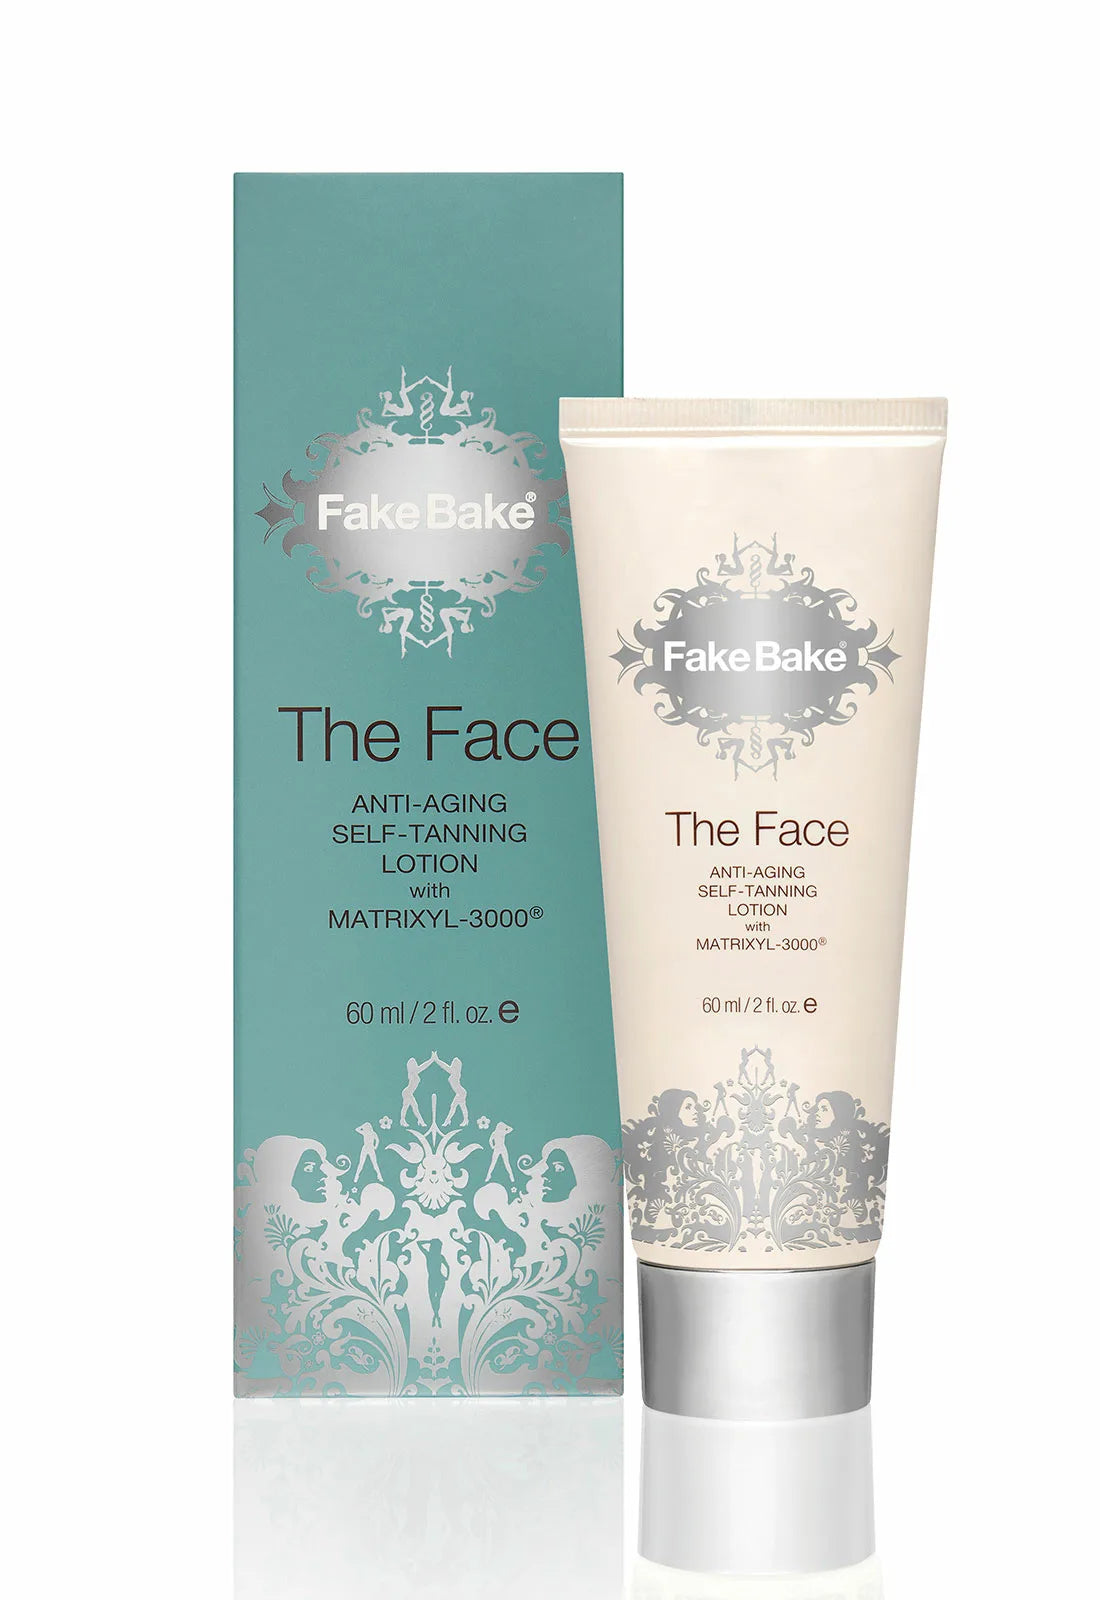 Fake Bakes The Face Anti Ageing Self Tanning Lotion with Matrixyl-3000Â®